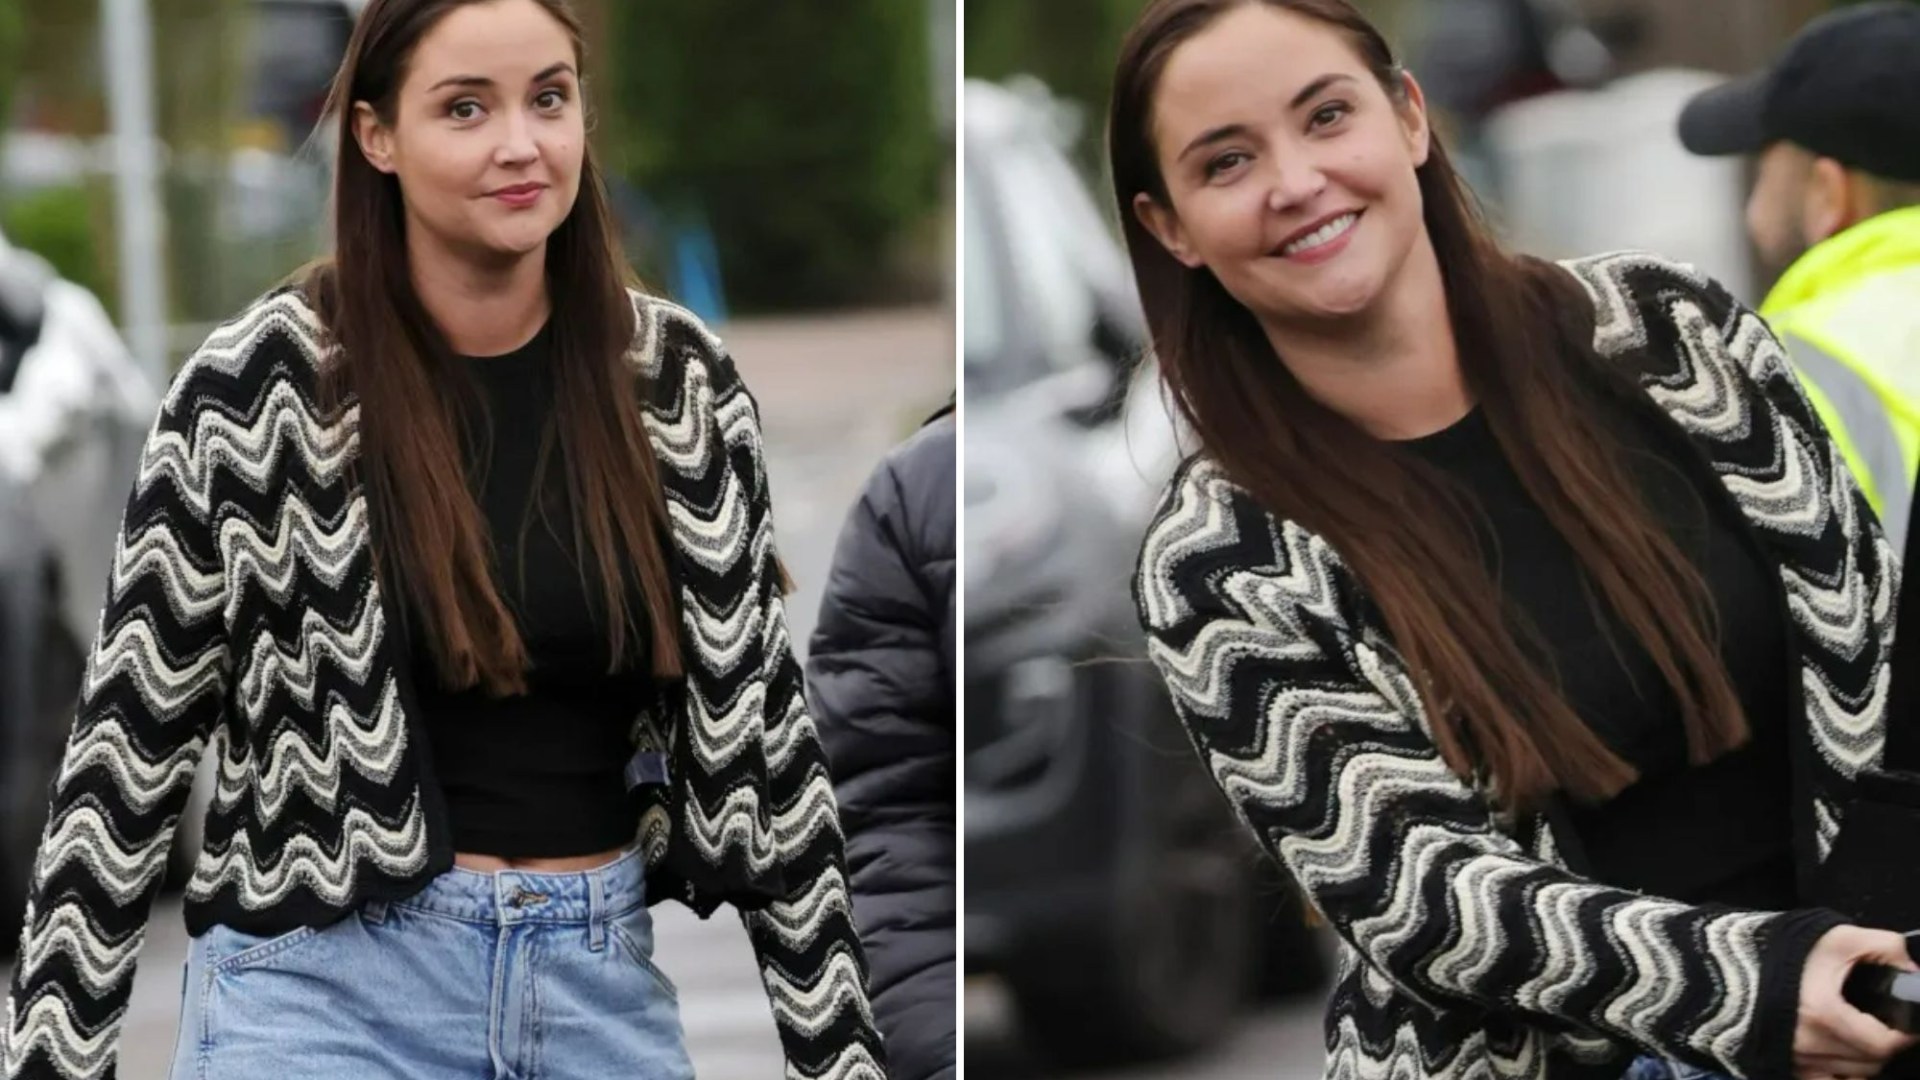 EastEnders Jacqueline Jossa shows off incredible weight loss as she leaves Albert Square set after health blitz [Video]